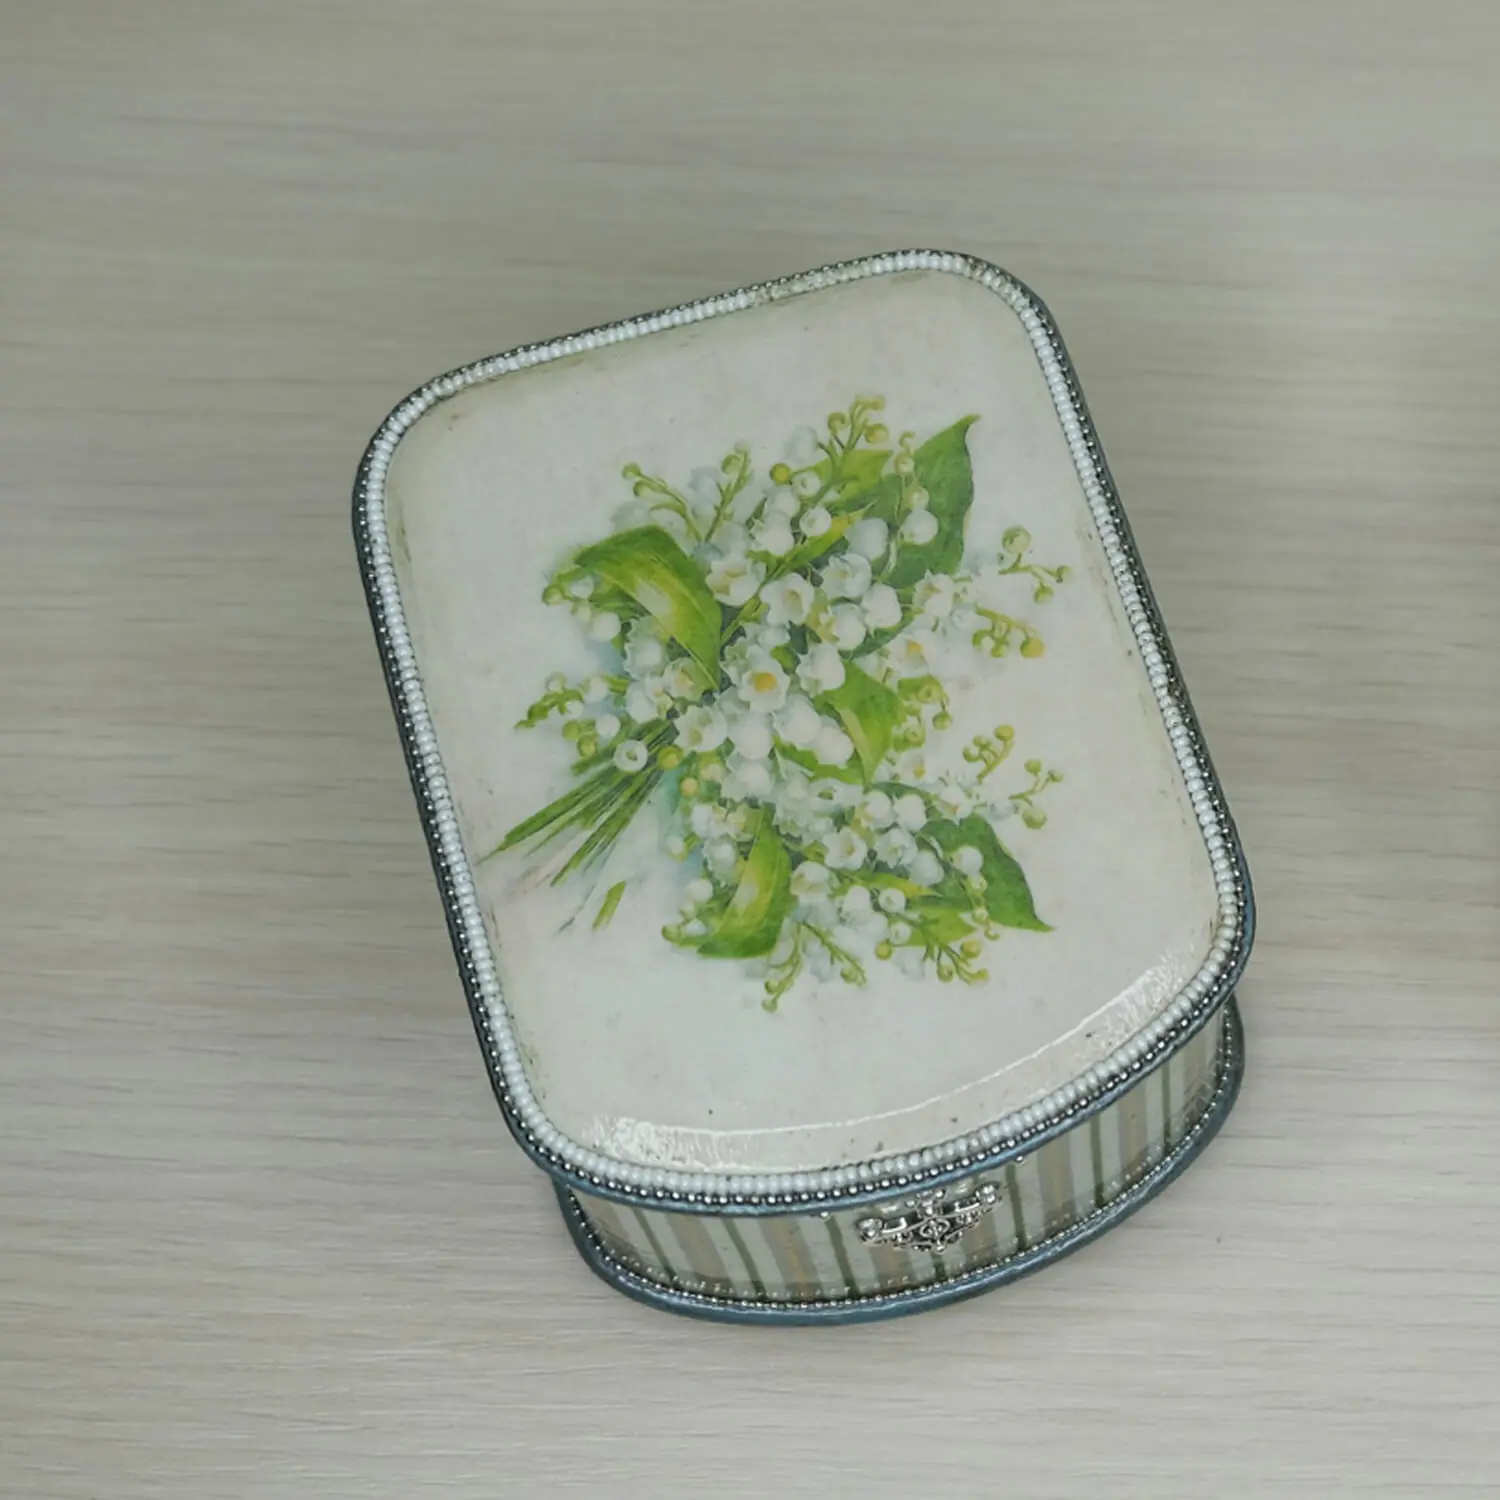 Christmas gift for mom Handmade wooden jewelry box silk lined